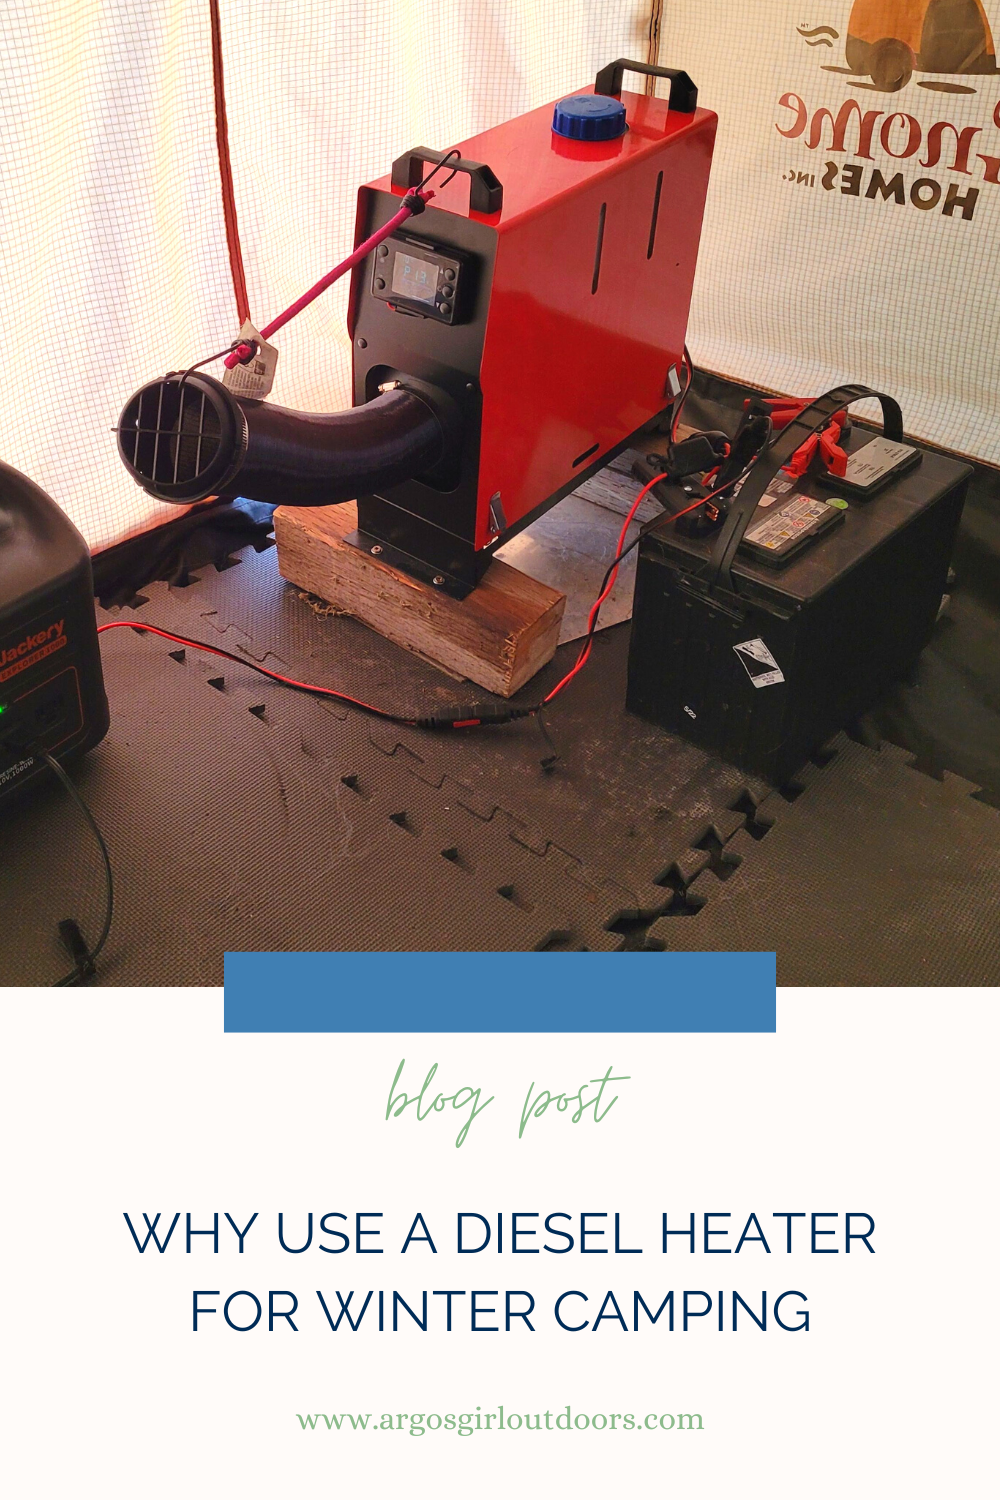 Why Use A Diesel Heater for Winter Camping - Argosgirl Outdoors